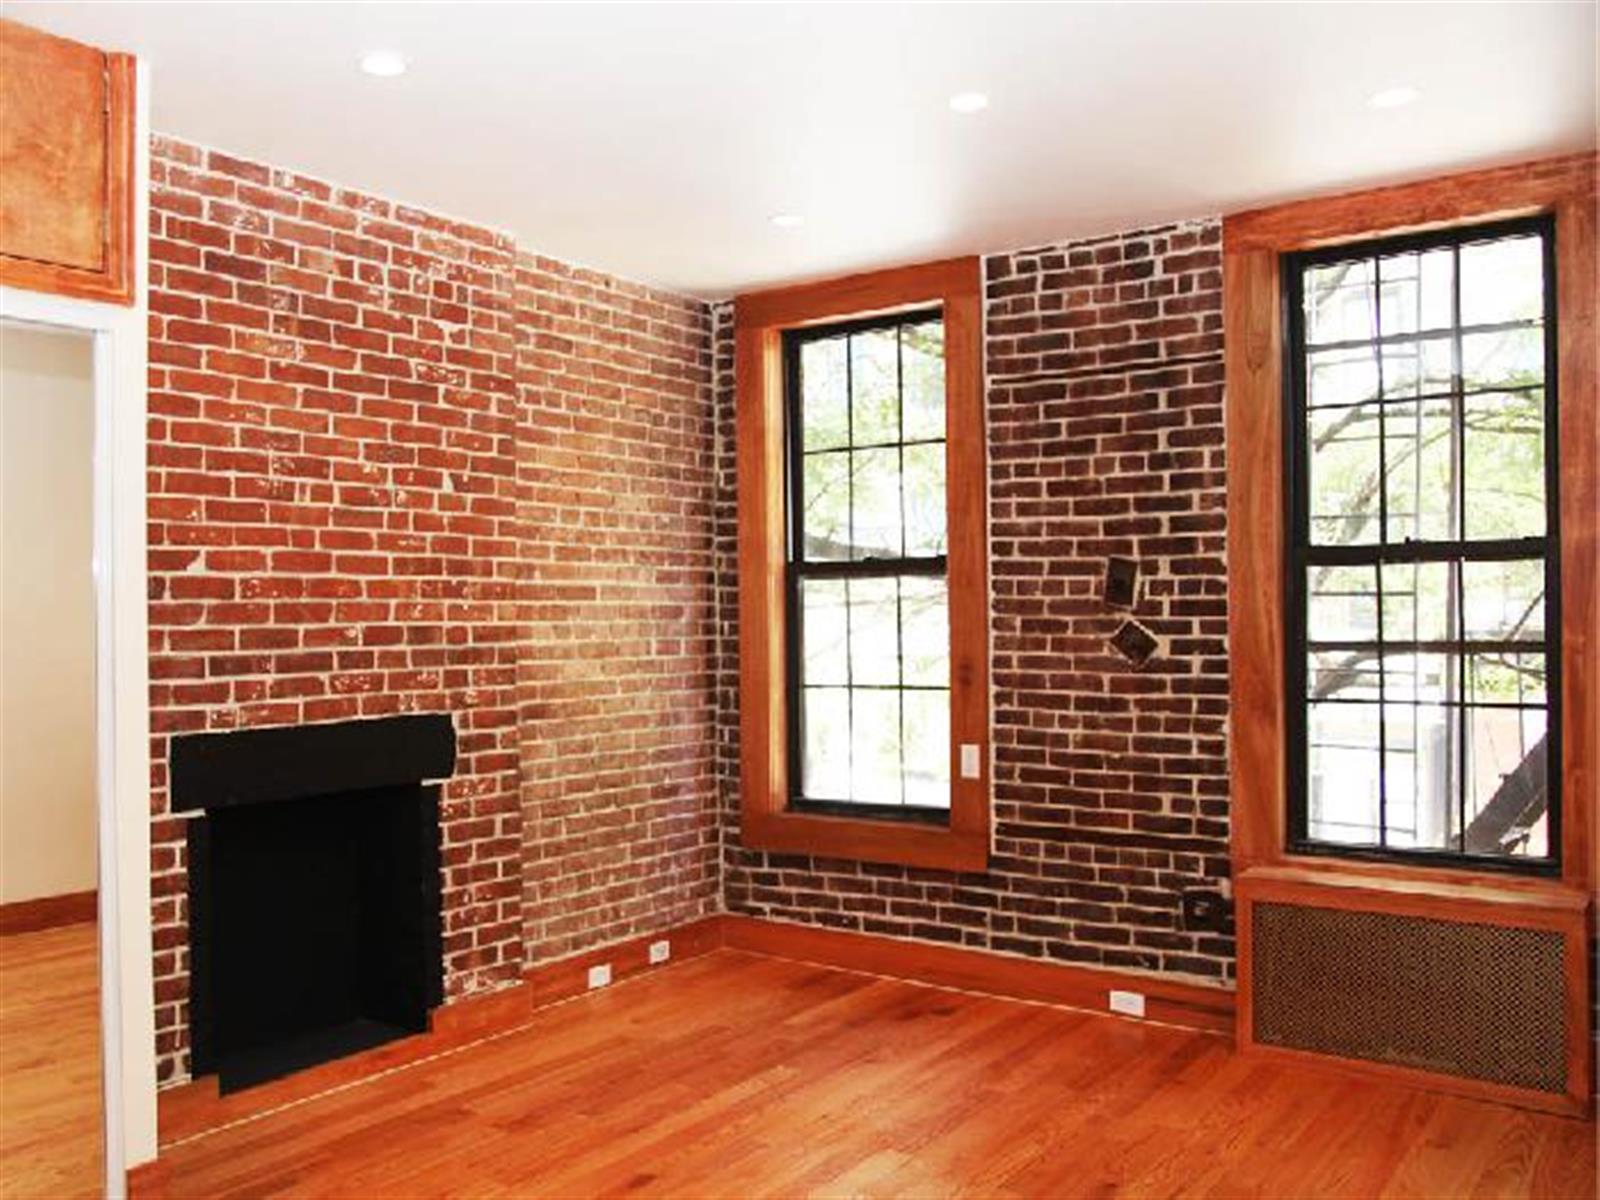 a view of an empty room with a fireplace and a window